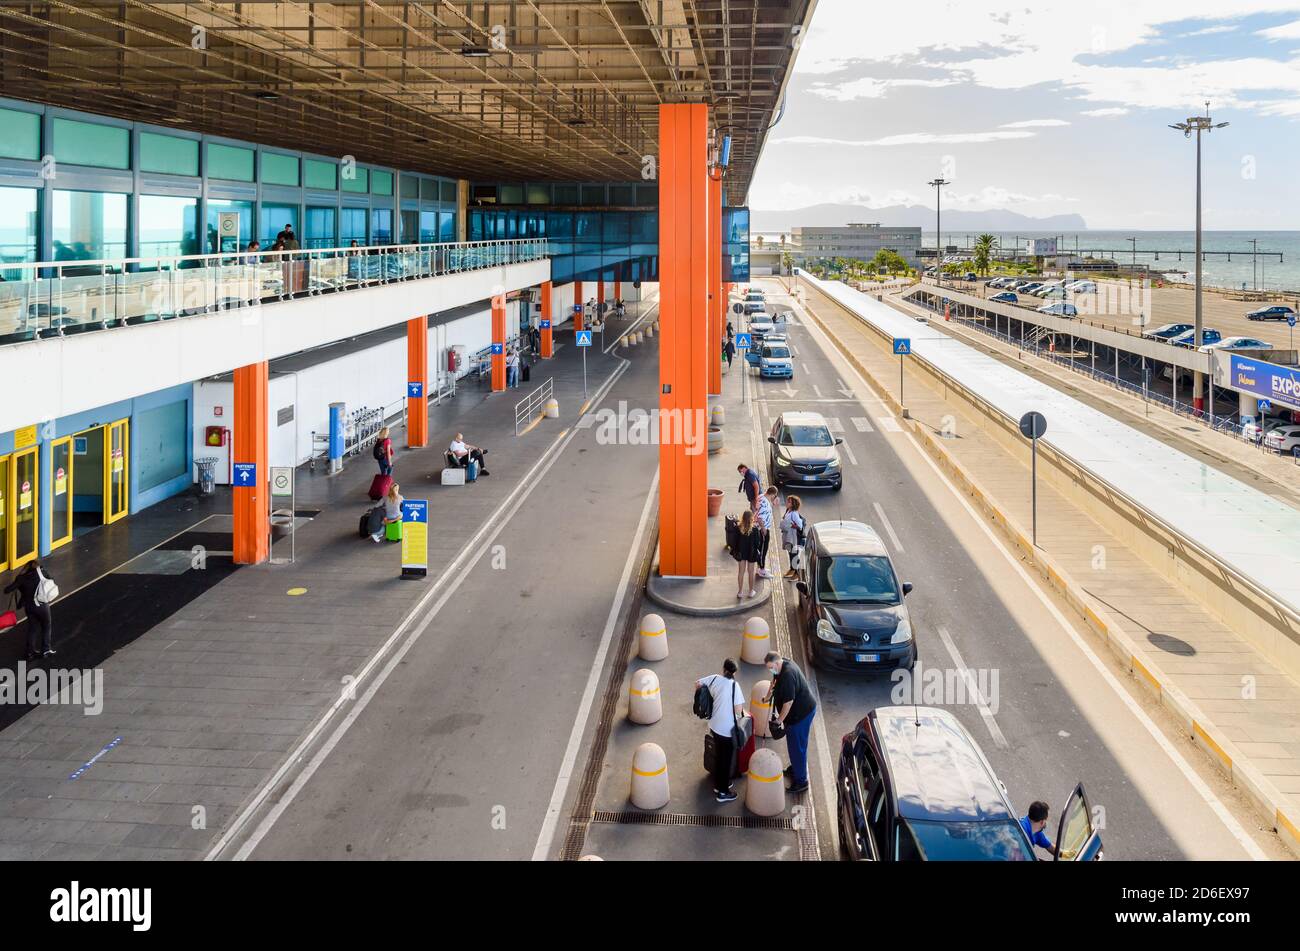 Palermo, Punta Raisi, Italy - September 29, 2020: Exterior of Palermo Falcone Borsellino Airport Departures terminal, with view of the parking and med Stock Photo